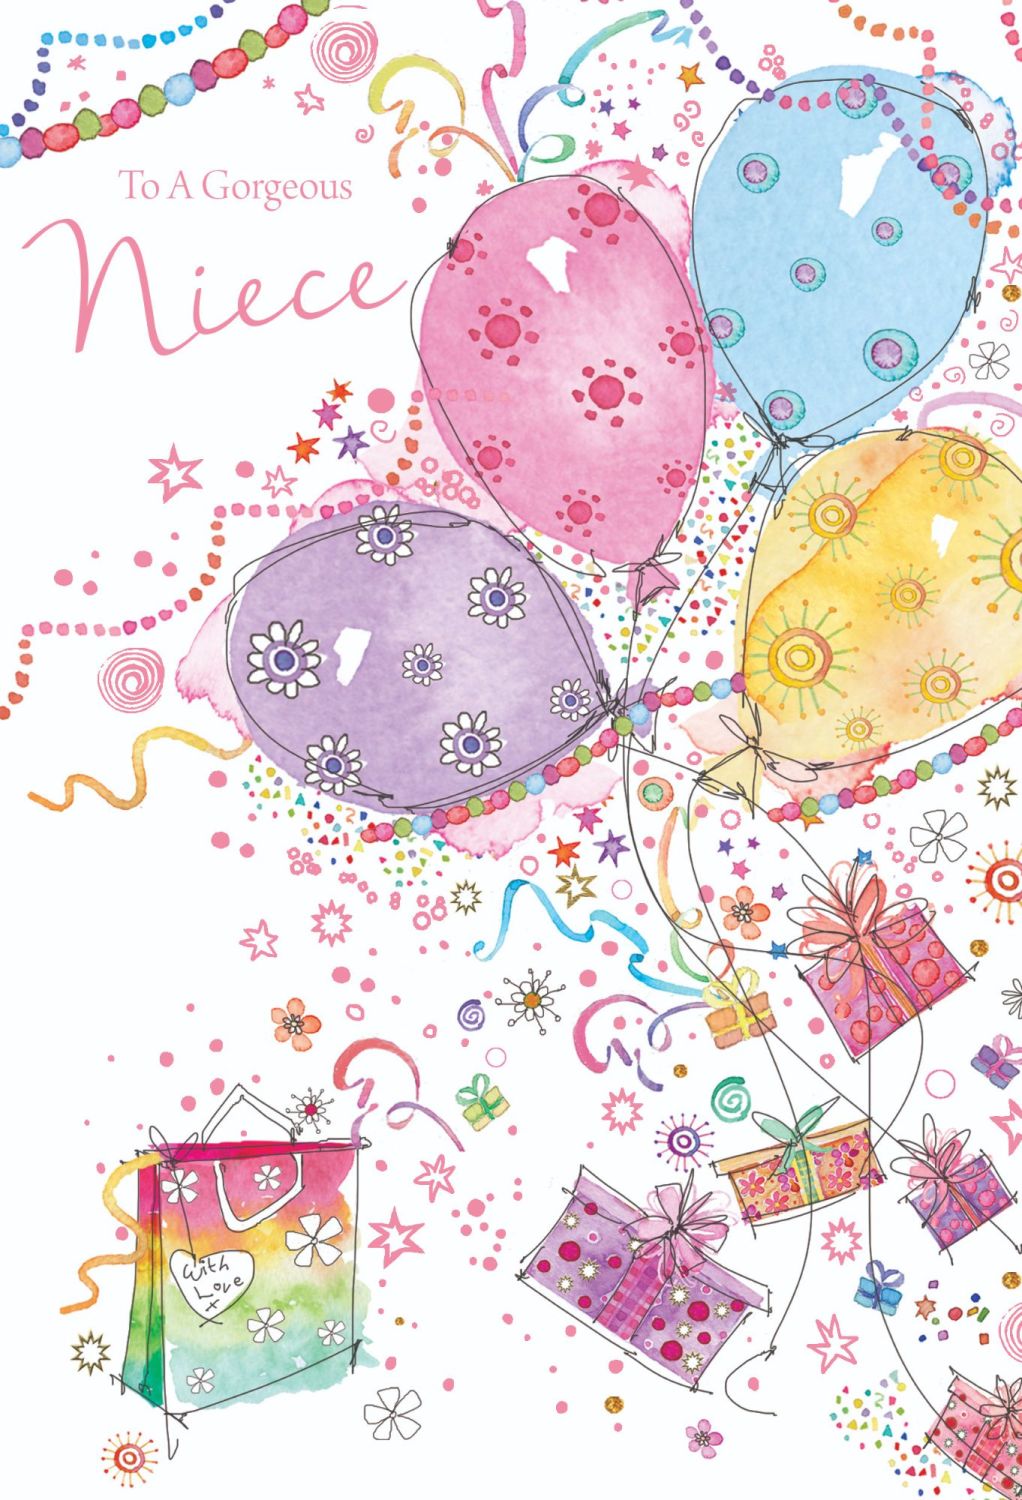 To A Gorgeous Niece - SPARKLY Birthday CARD For NIECE - Niece BIRTHDAY Card